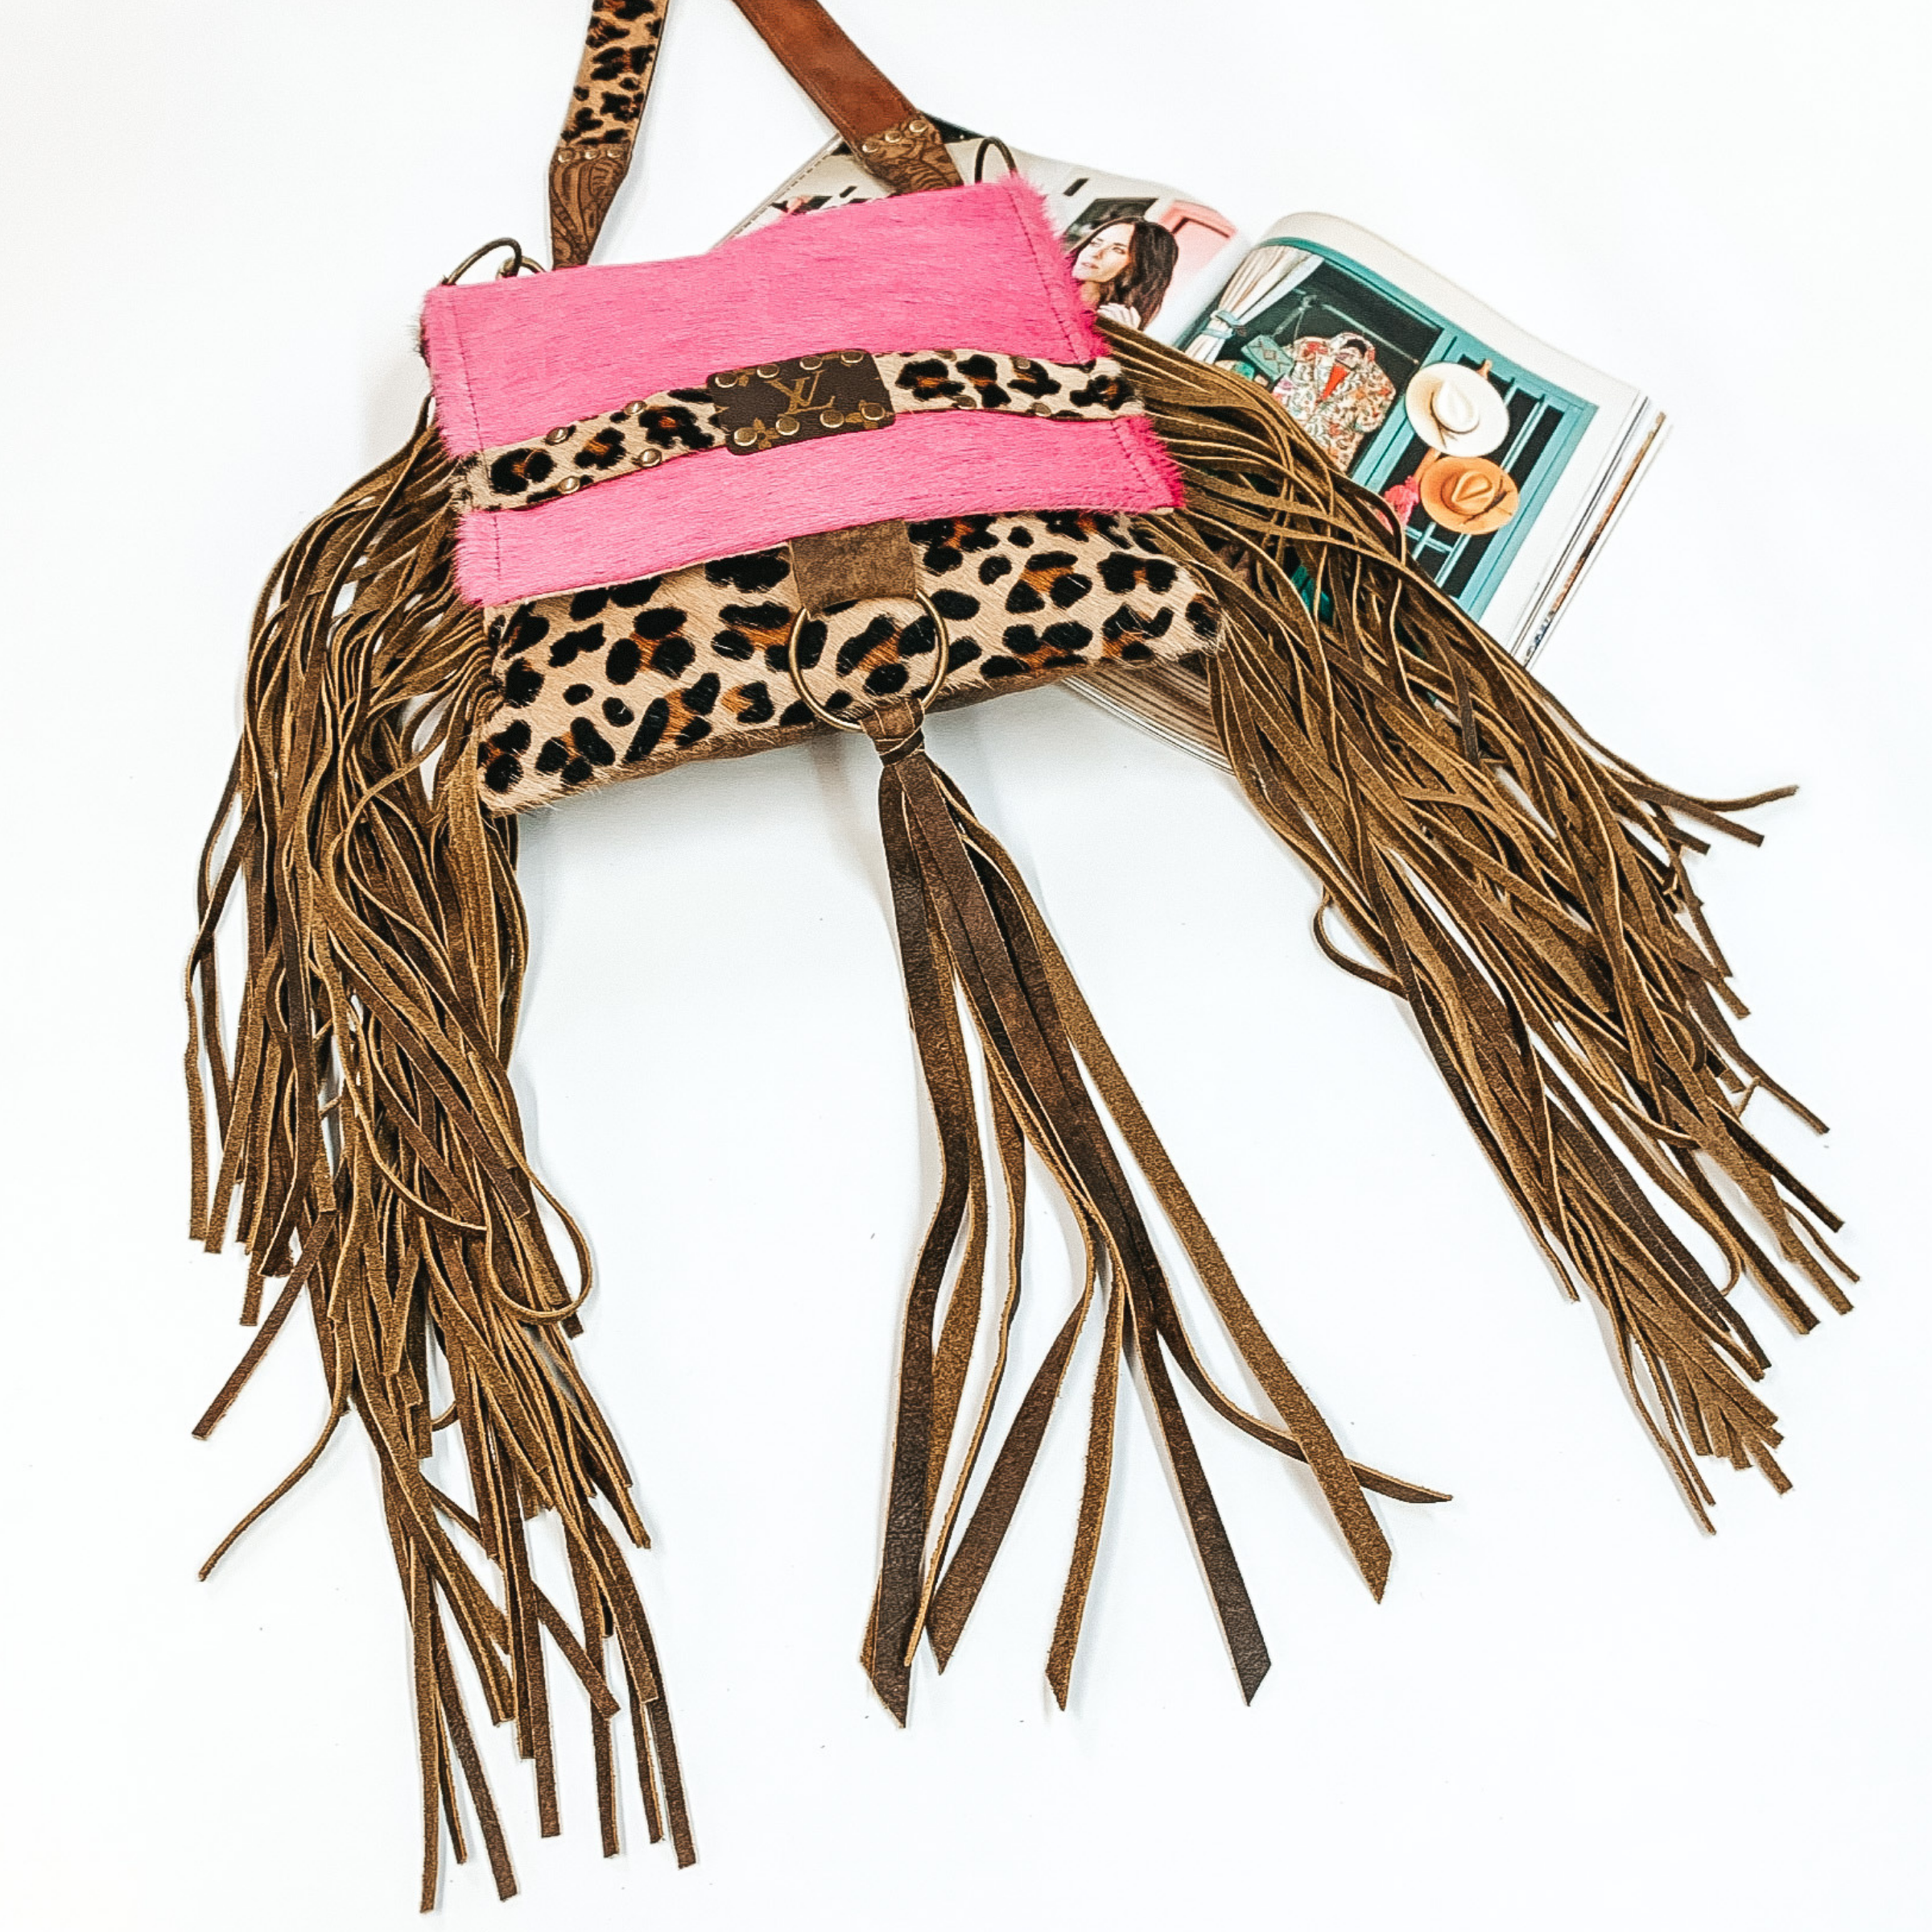 Keep It Gypsy | Leopard Print and Pink Cowhide Purse with Genuine Leather Fringe - Giddy Up Glamour Boutique